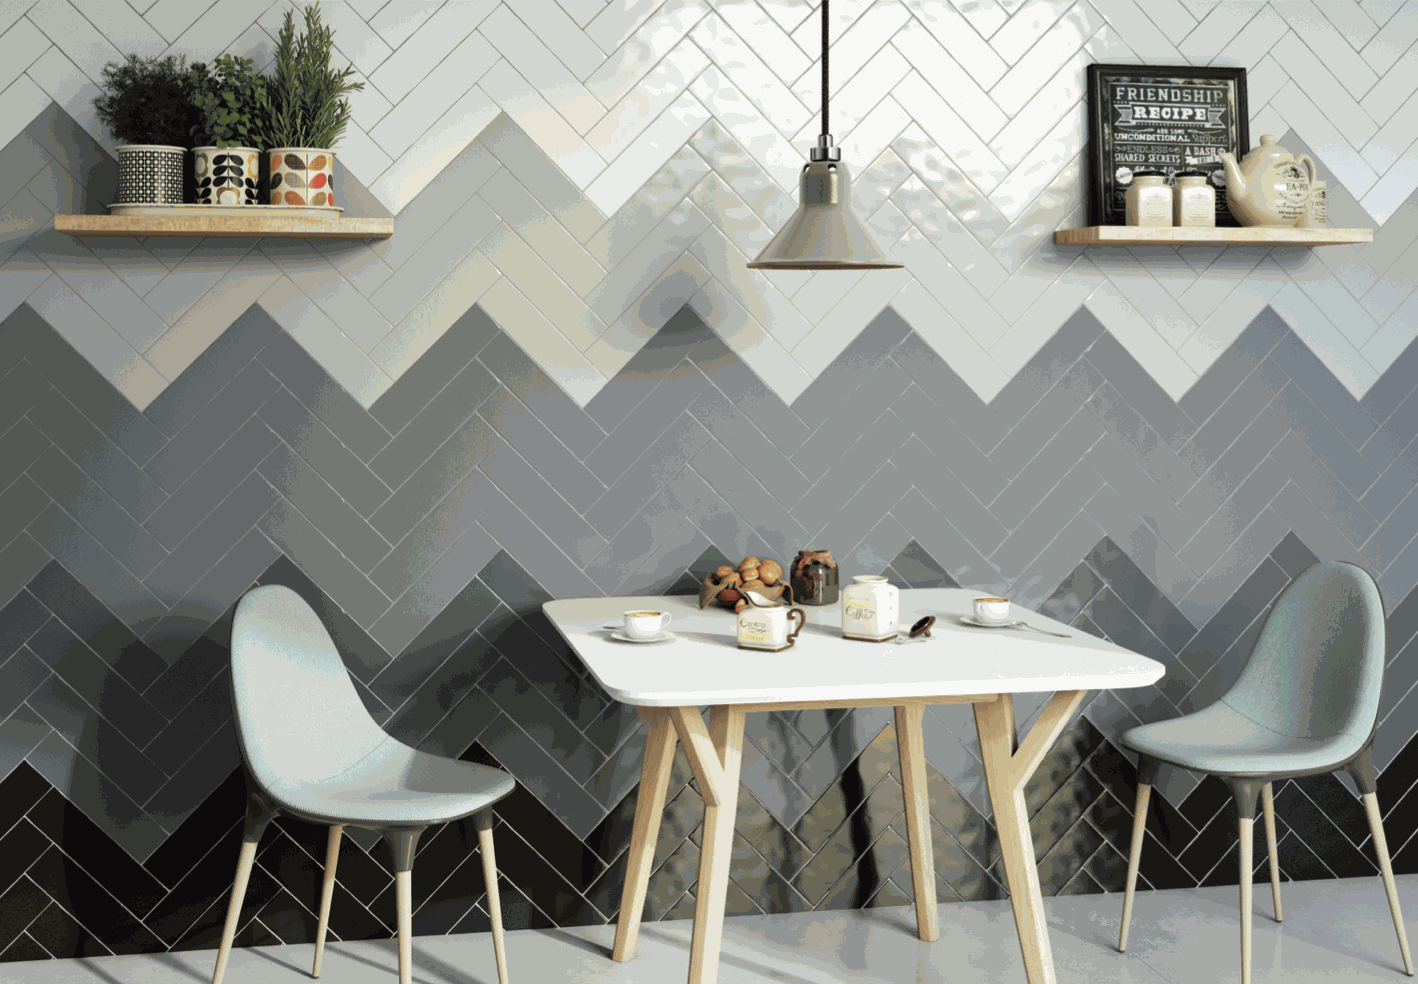 Shows a catalog scene featuring dark, grey, and white subway tiles arranged in chevrons. Modern looking